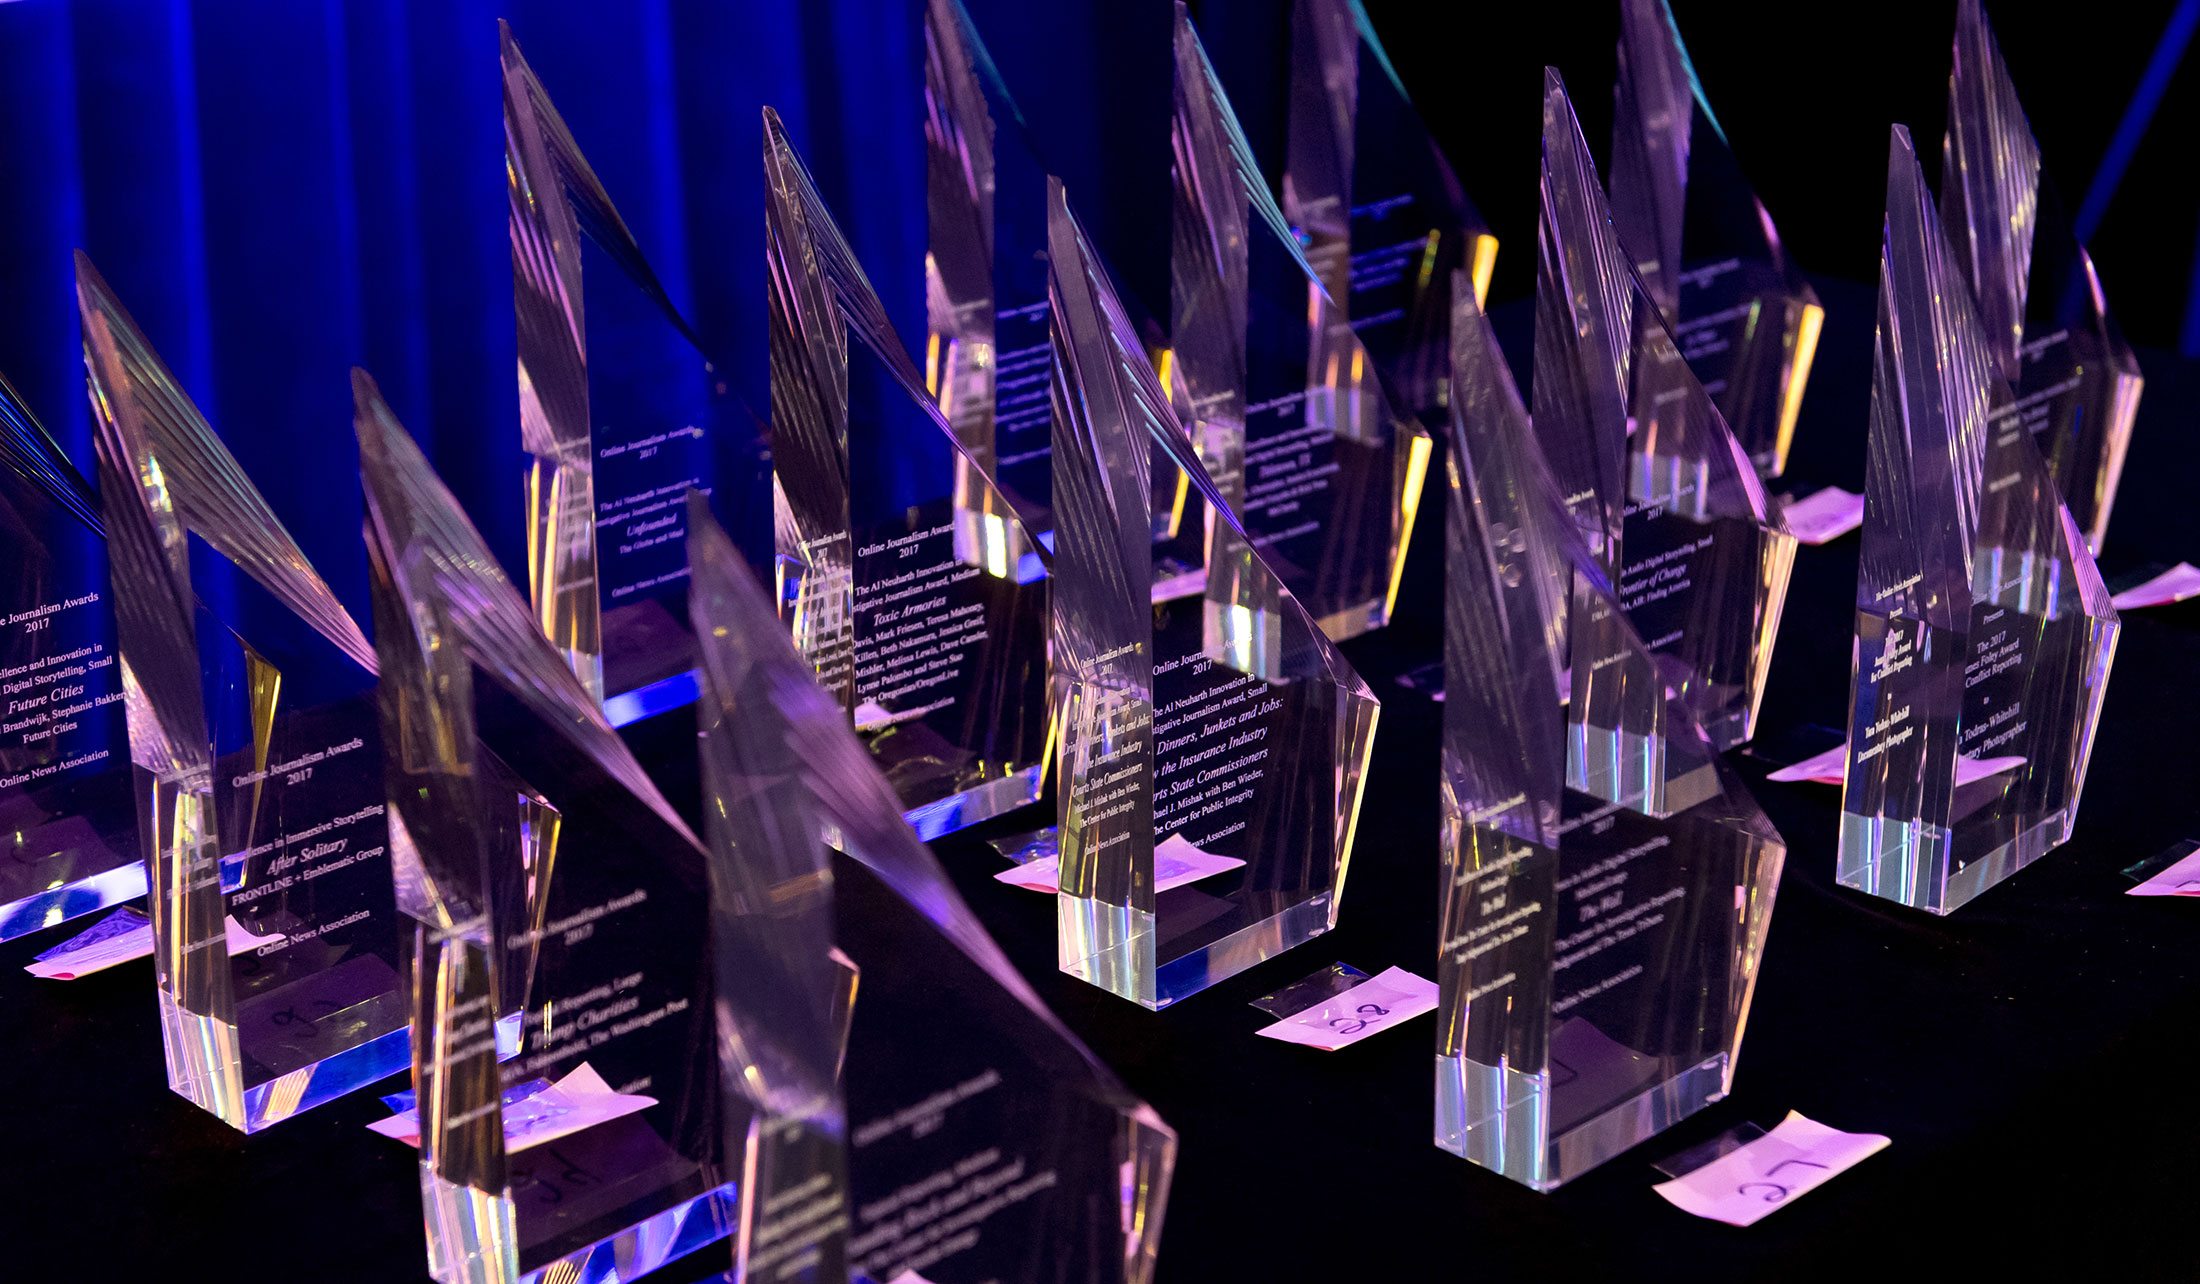 Explore the Categories of the Online Journalism Awards